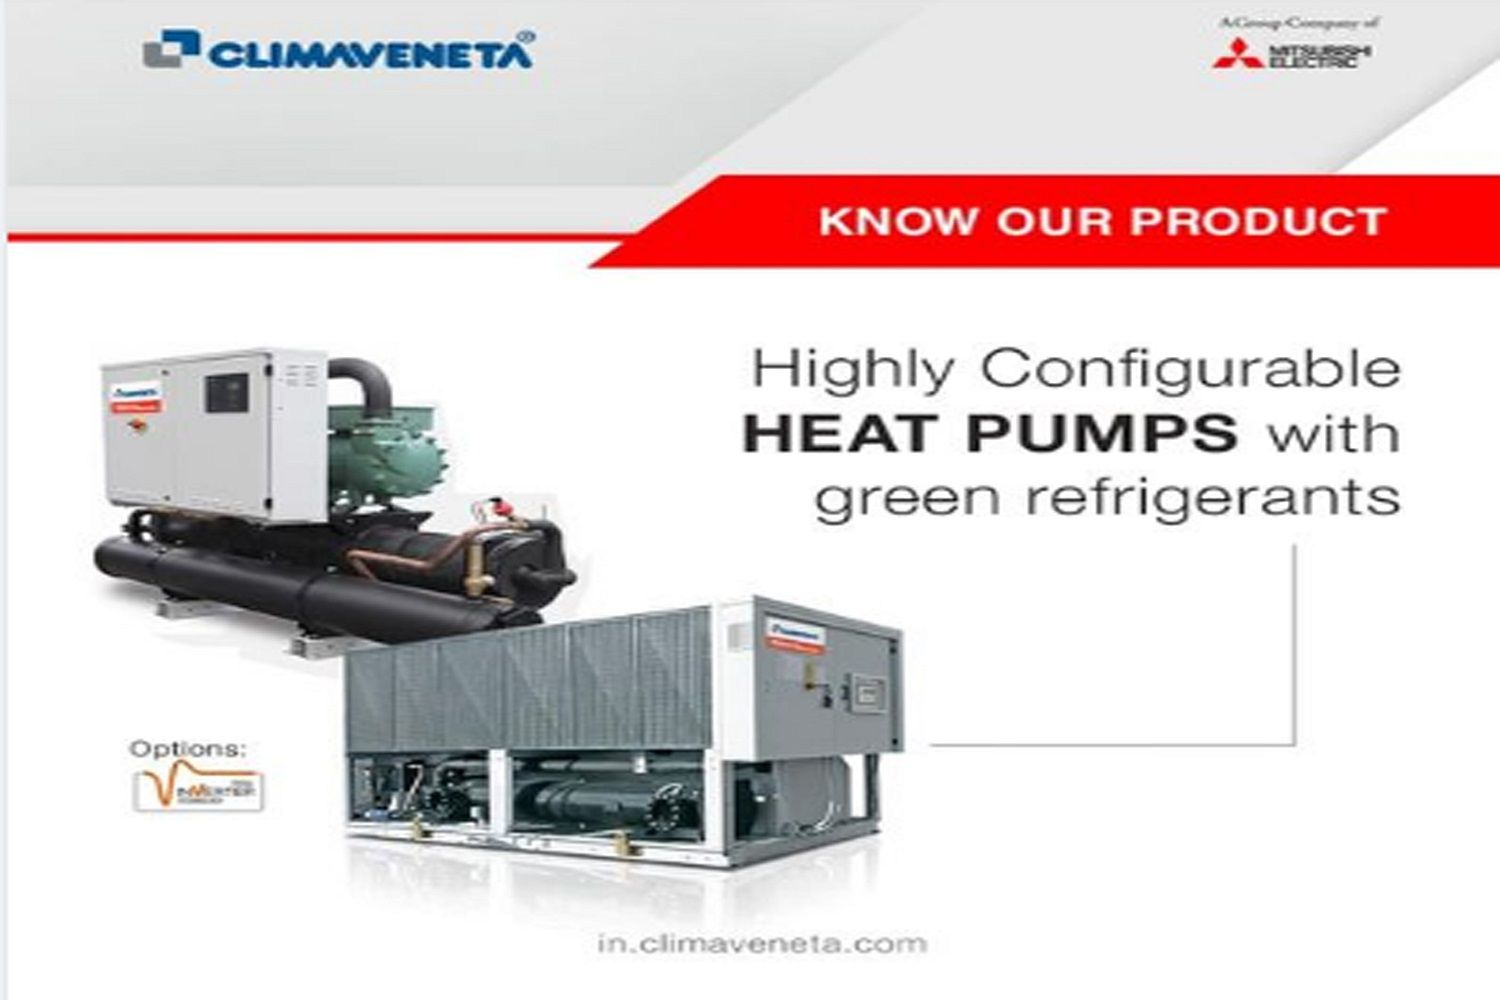 Highly Configurable Heat Pumps with green refrigerants